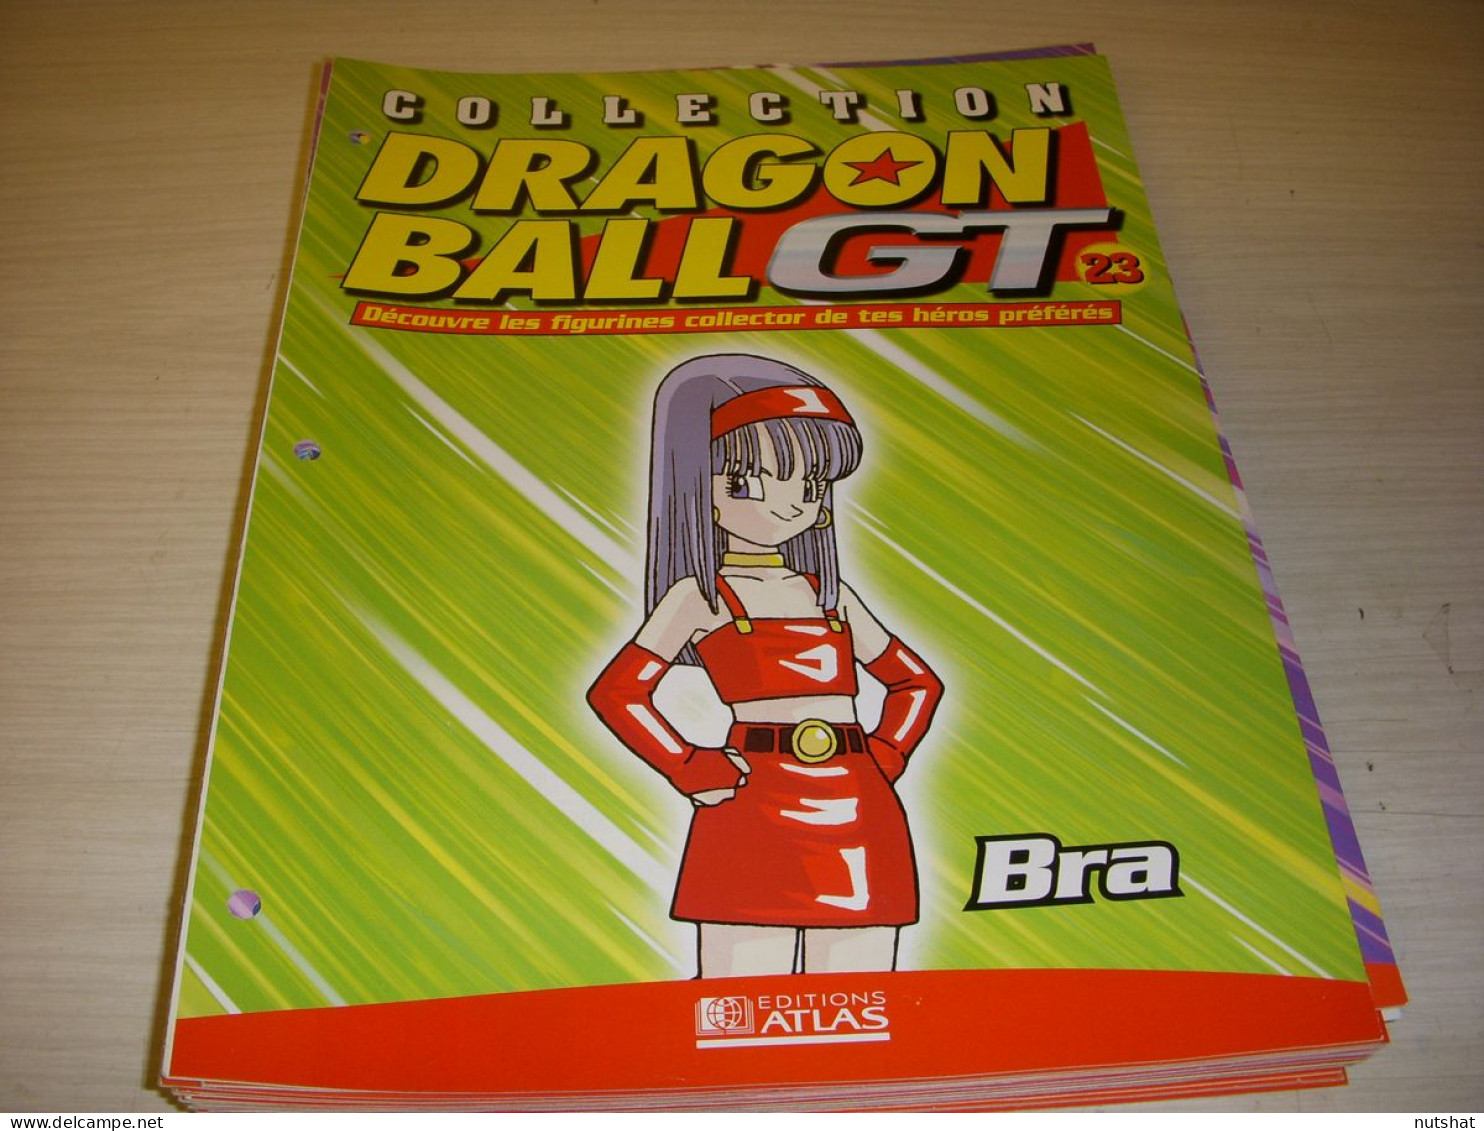 COLLECTION DRAGON BALL 23 BRA VALACE PAIKUHAN Les Planetes : PITAL Dessine BRA - Other Products